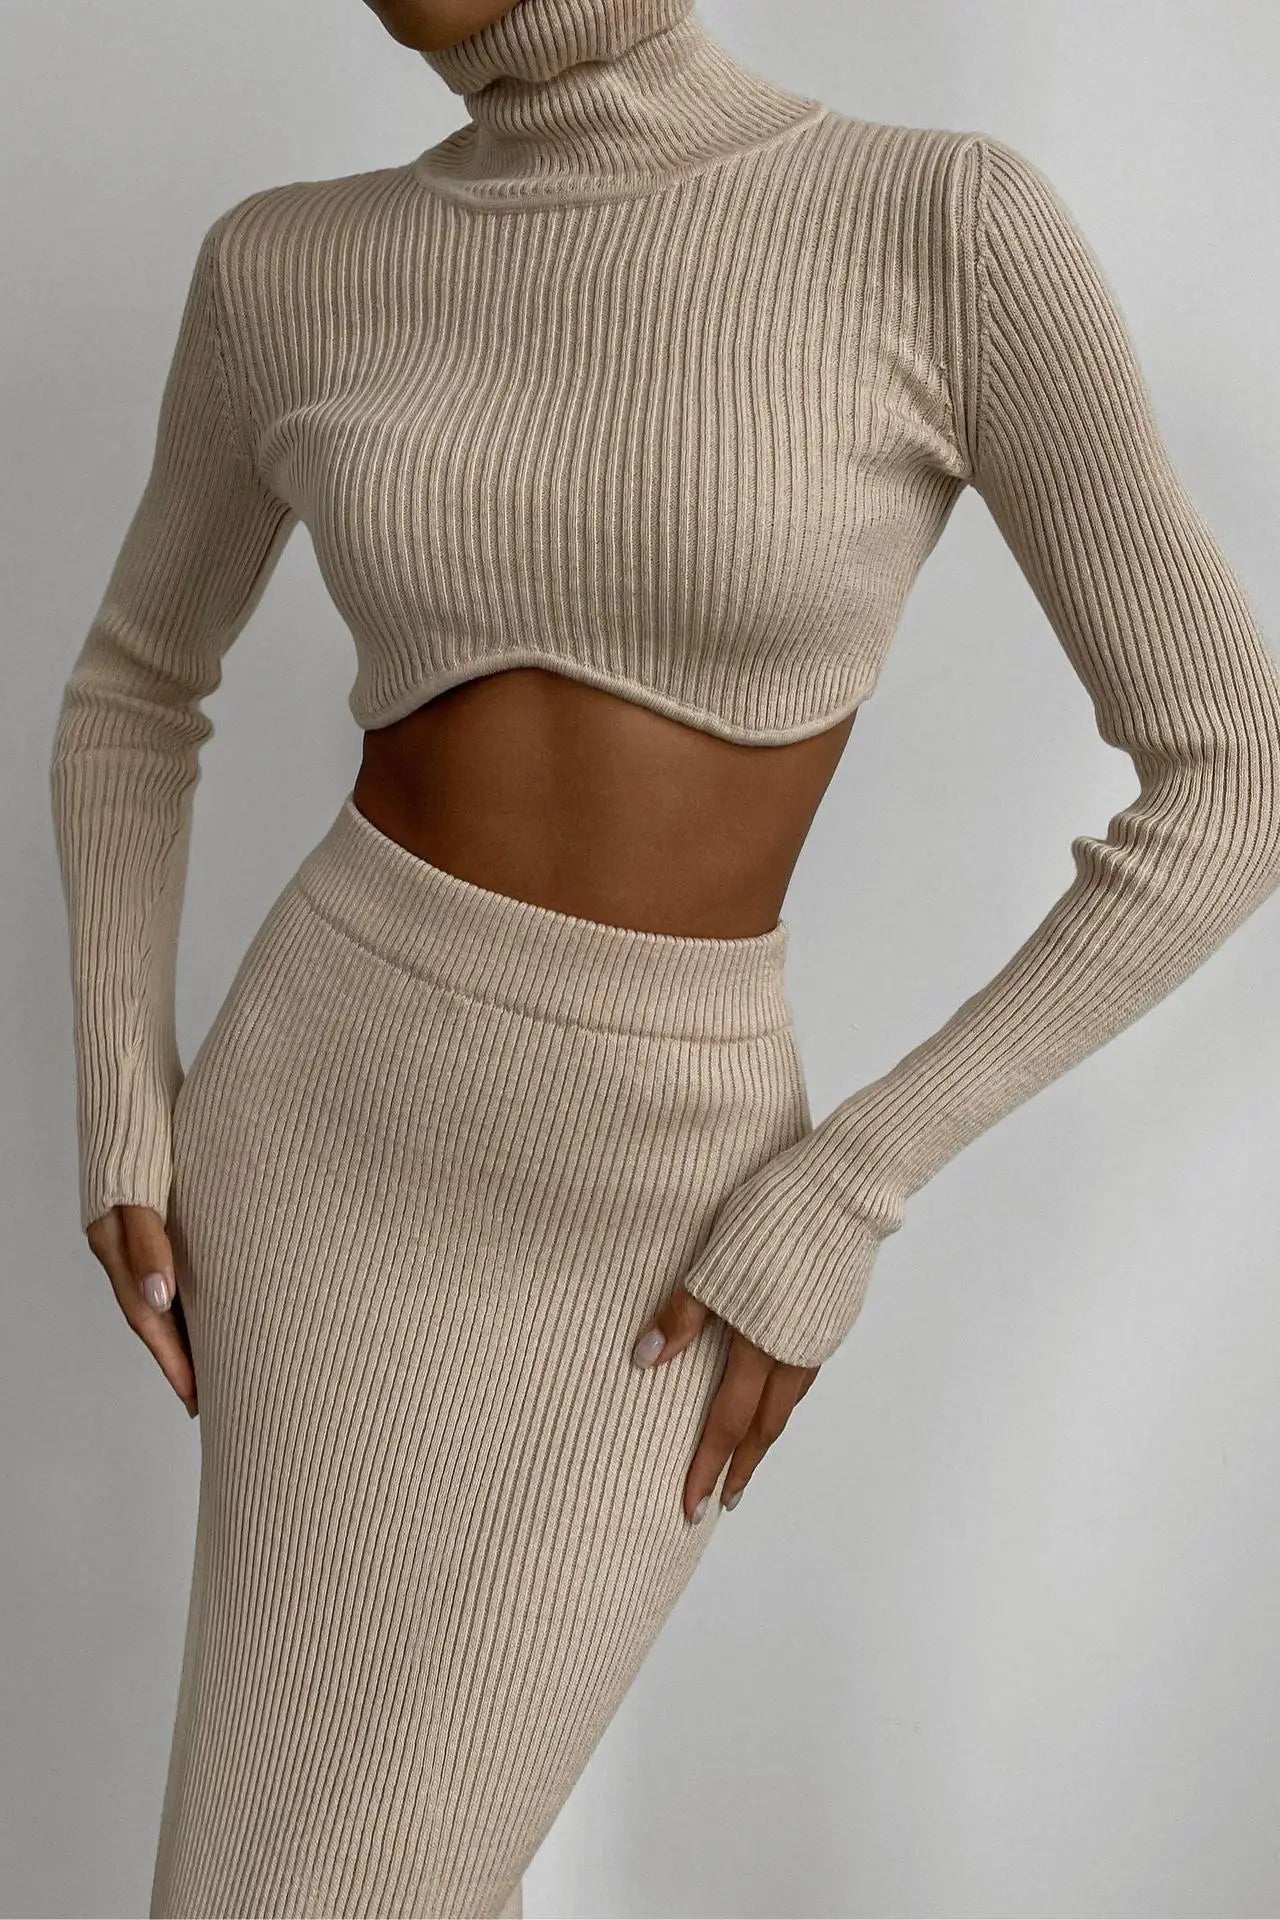 image_396_Chic_Women_Knitted_Set_Crop_Tops_and_Skirt_Clothing_Autumn_Winter_YK_Slim_Sexy_Street_Fashion__Two_Piece_Outfits_1.webp